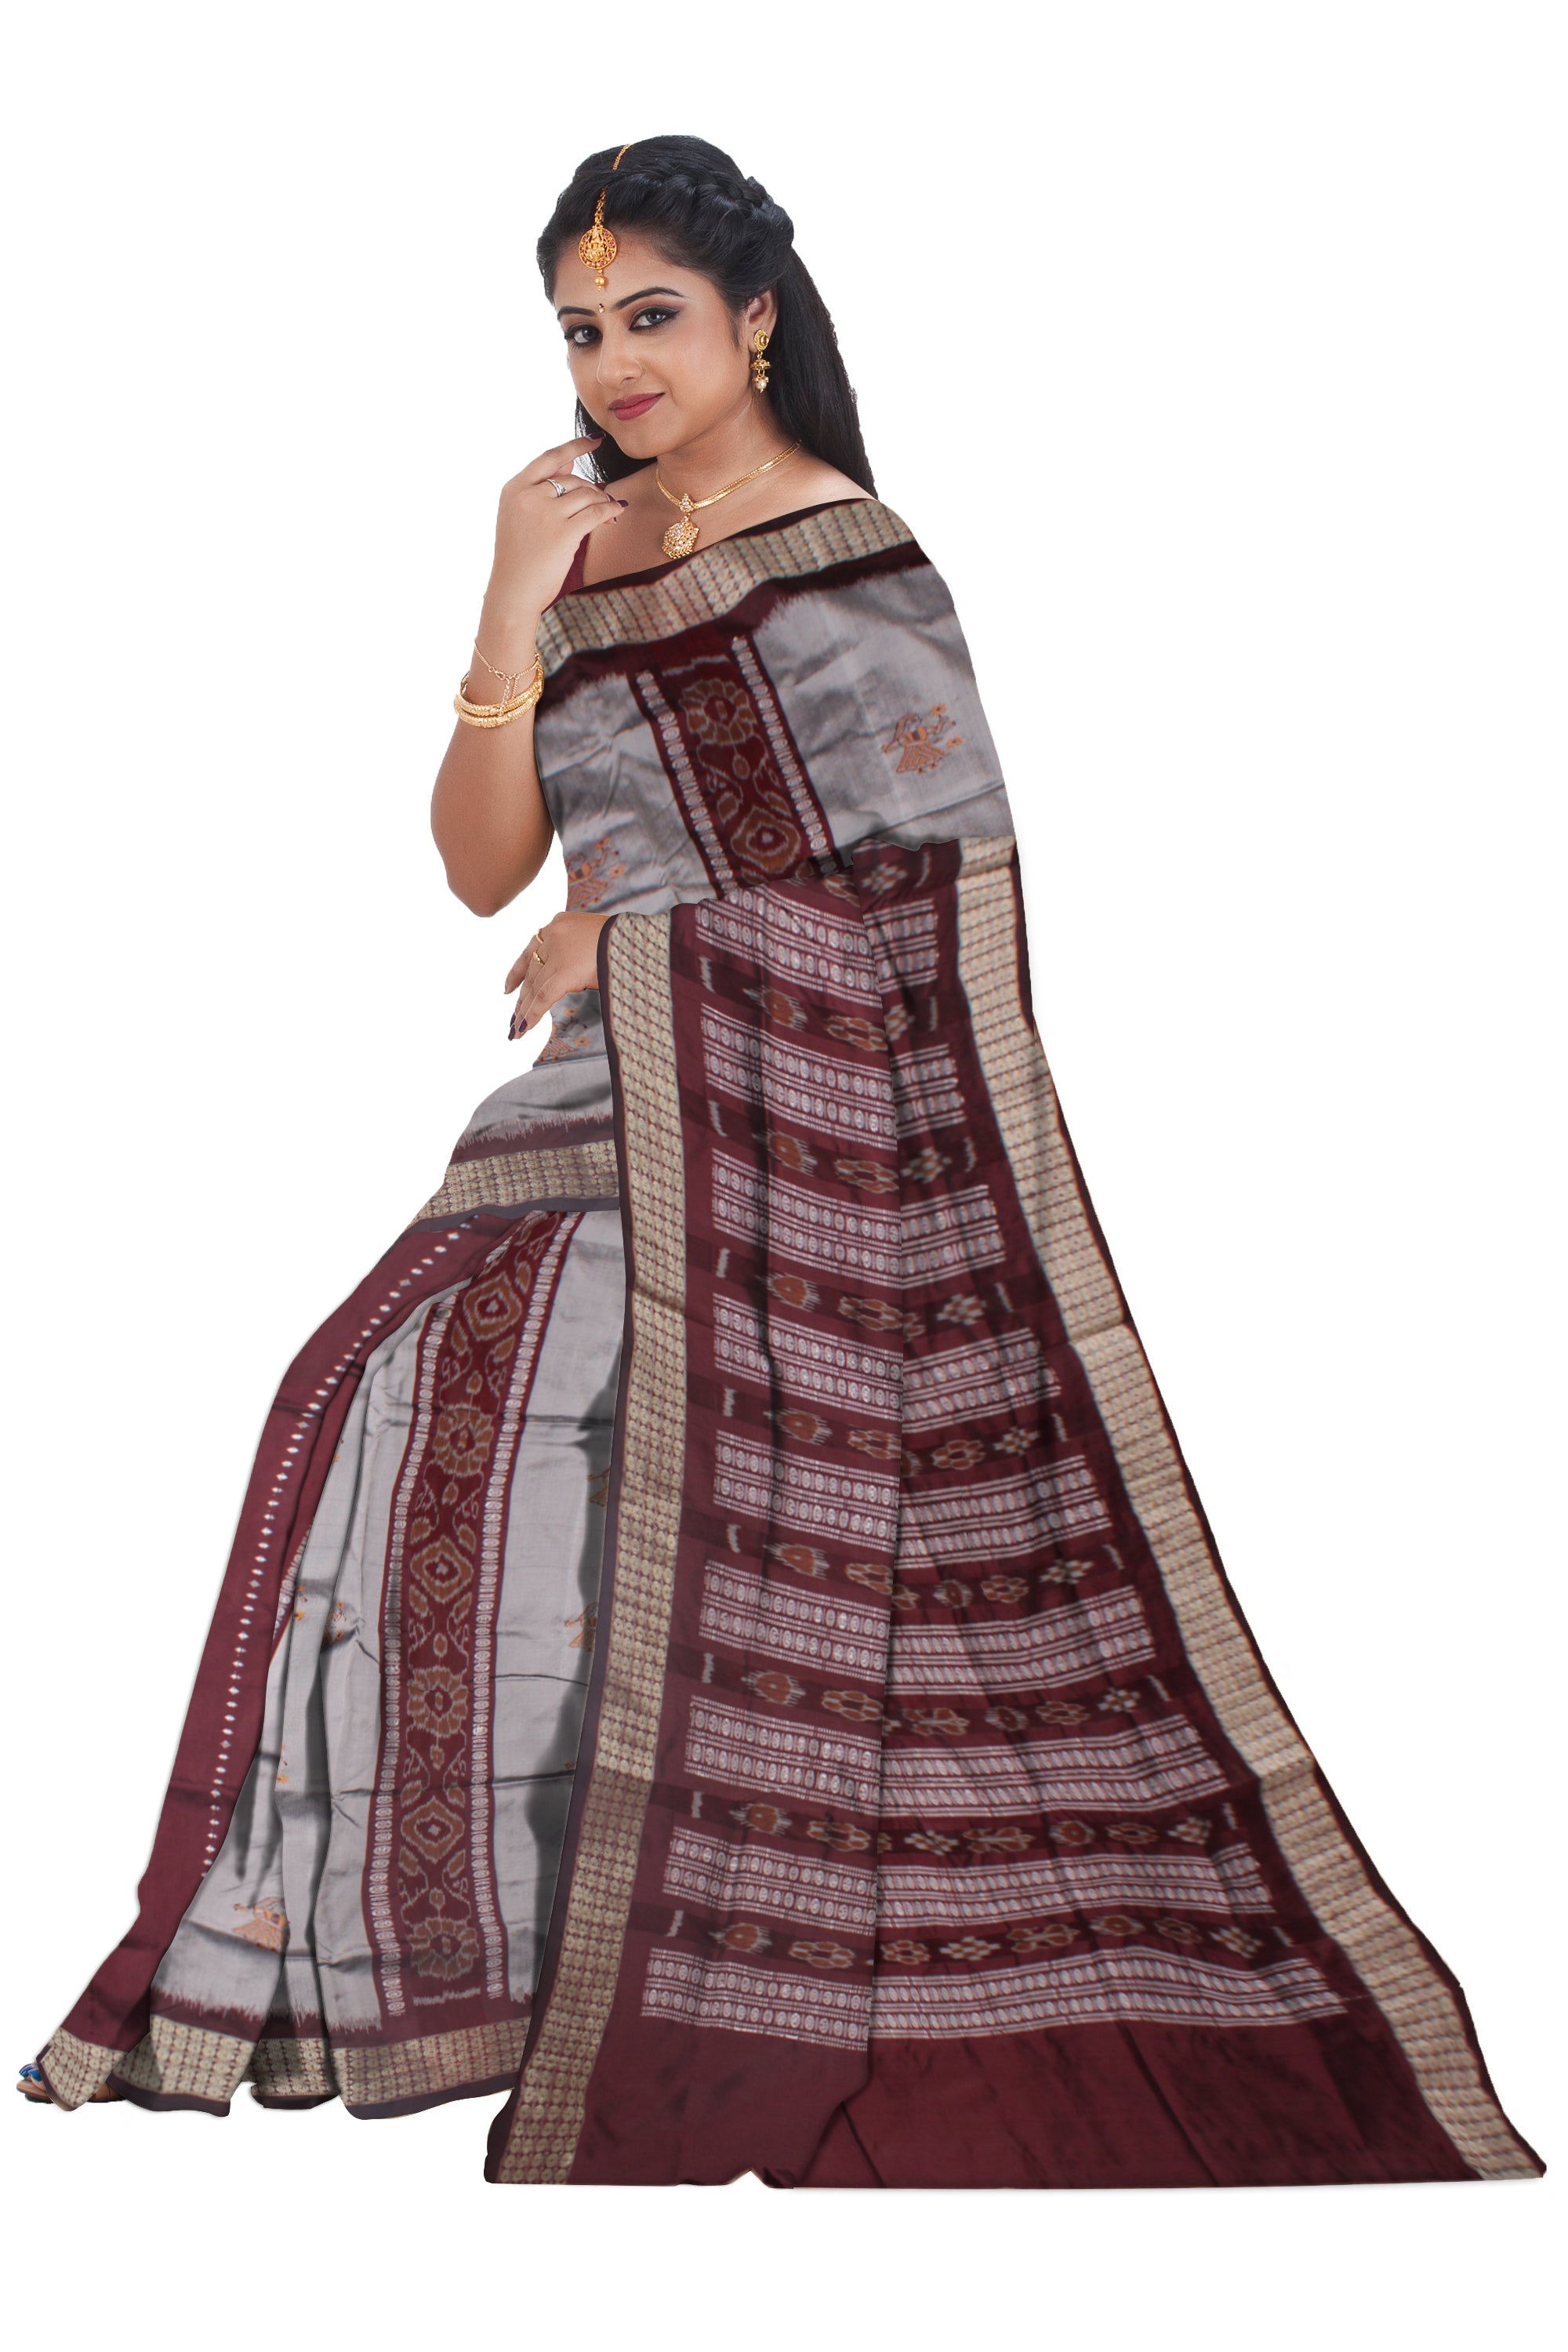 LATEST COLLECTION DOLL PRINT PATLI PATA SAREE IS SILVER AND COFFEE COLOR BASE, ATTACHED WITH MATCHING BLOUSE PIECE. - Koshali Arts & Crafts Enterprise